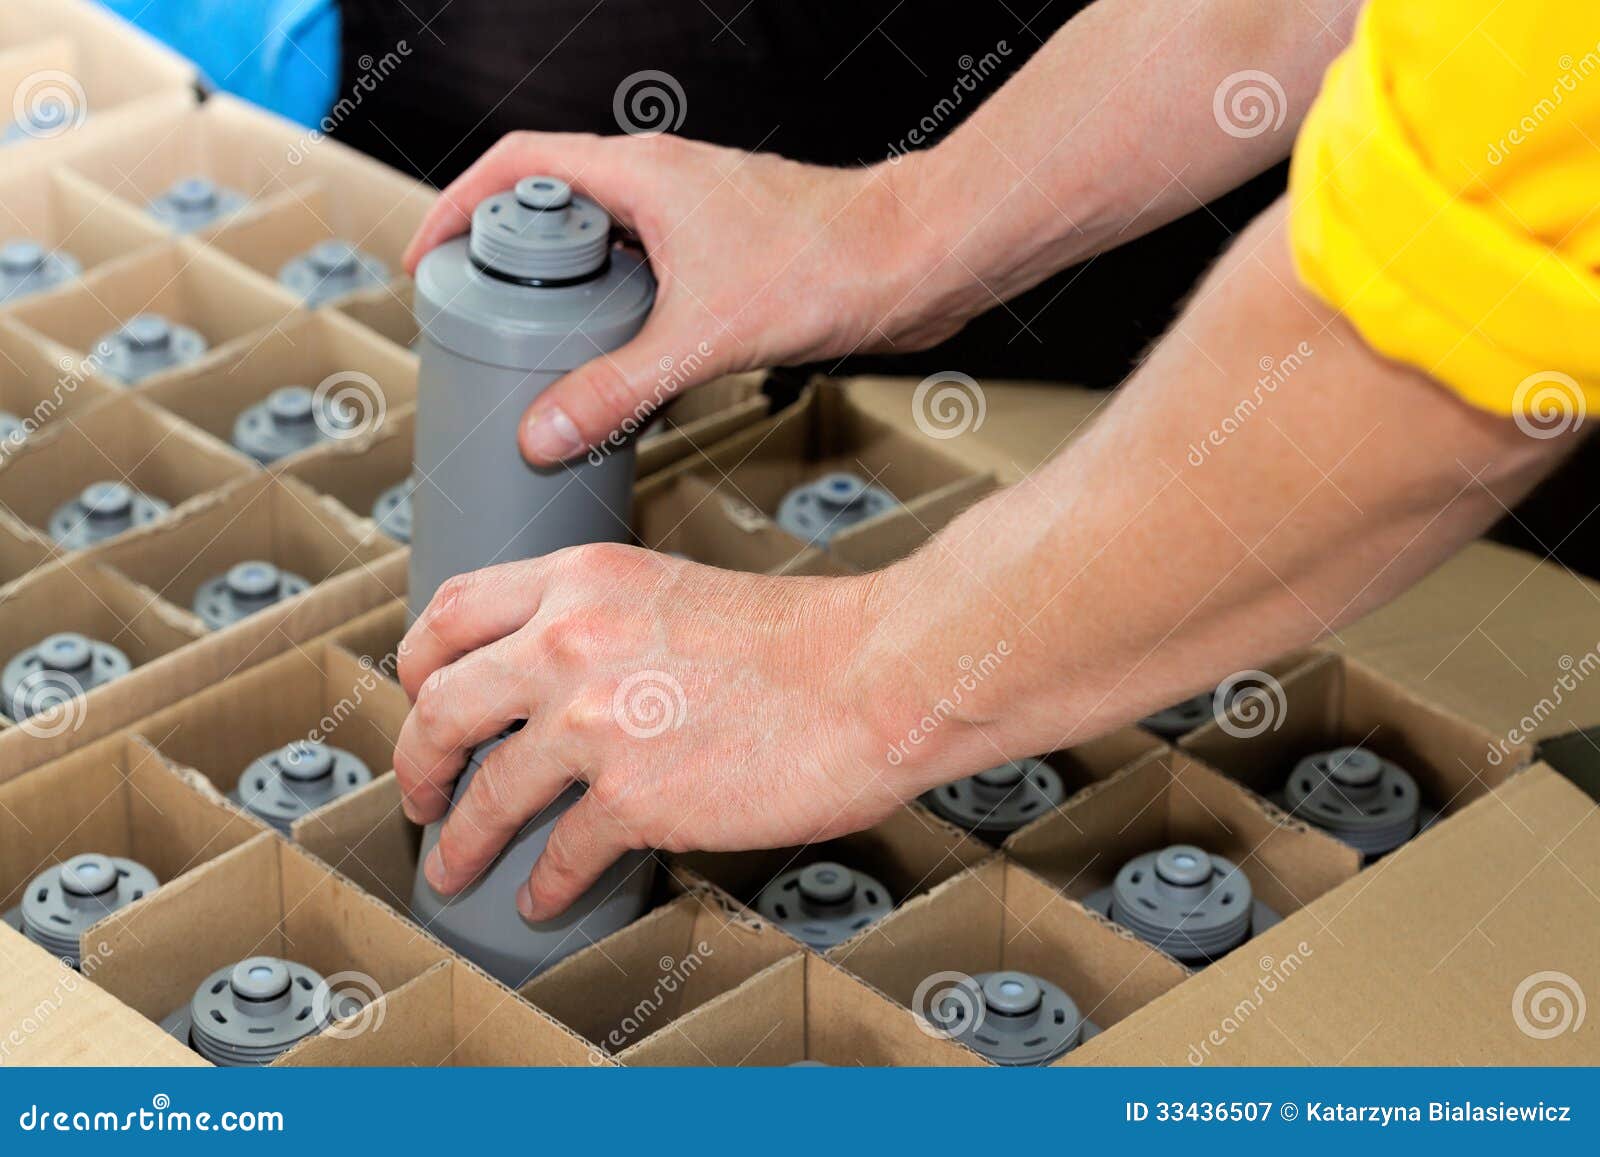 packing water filters